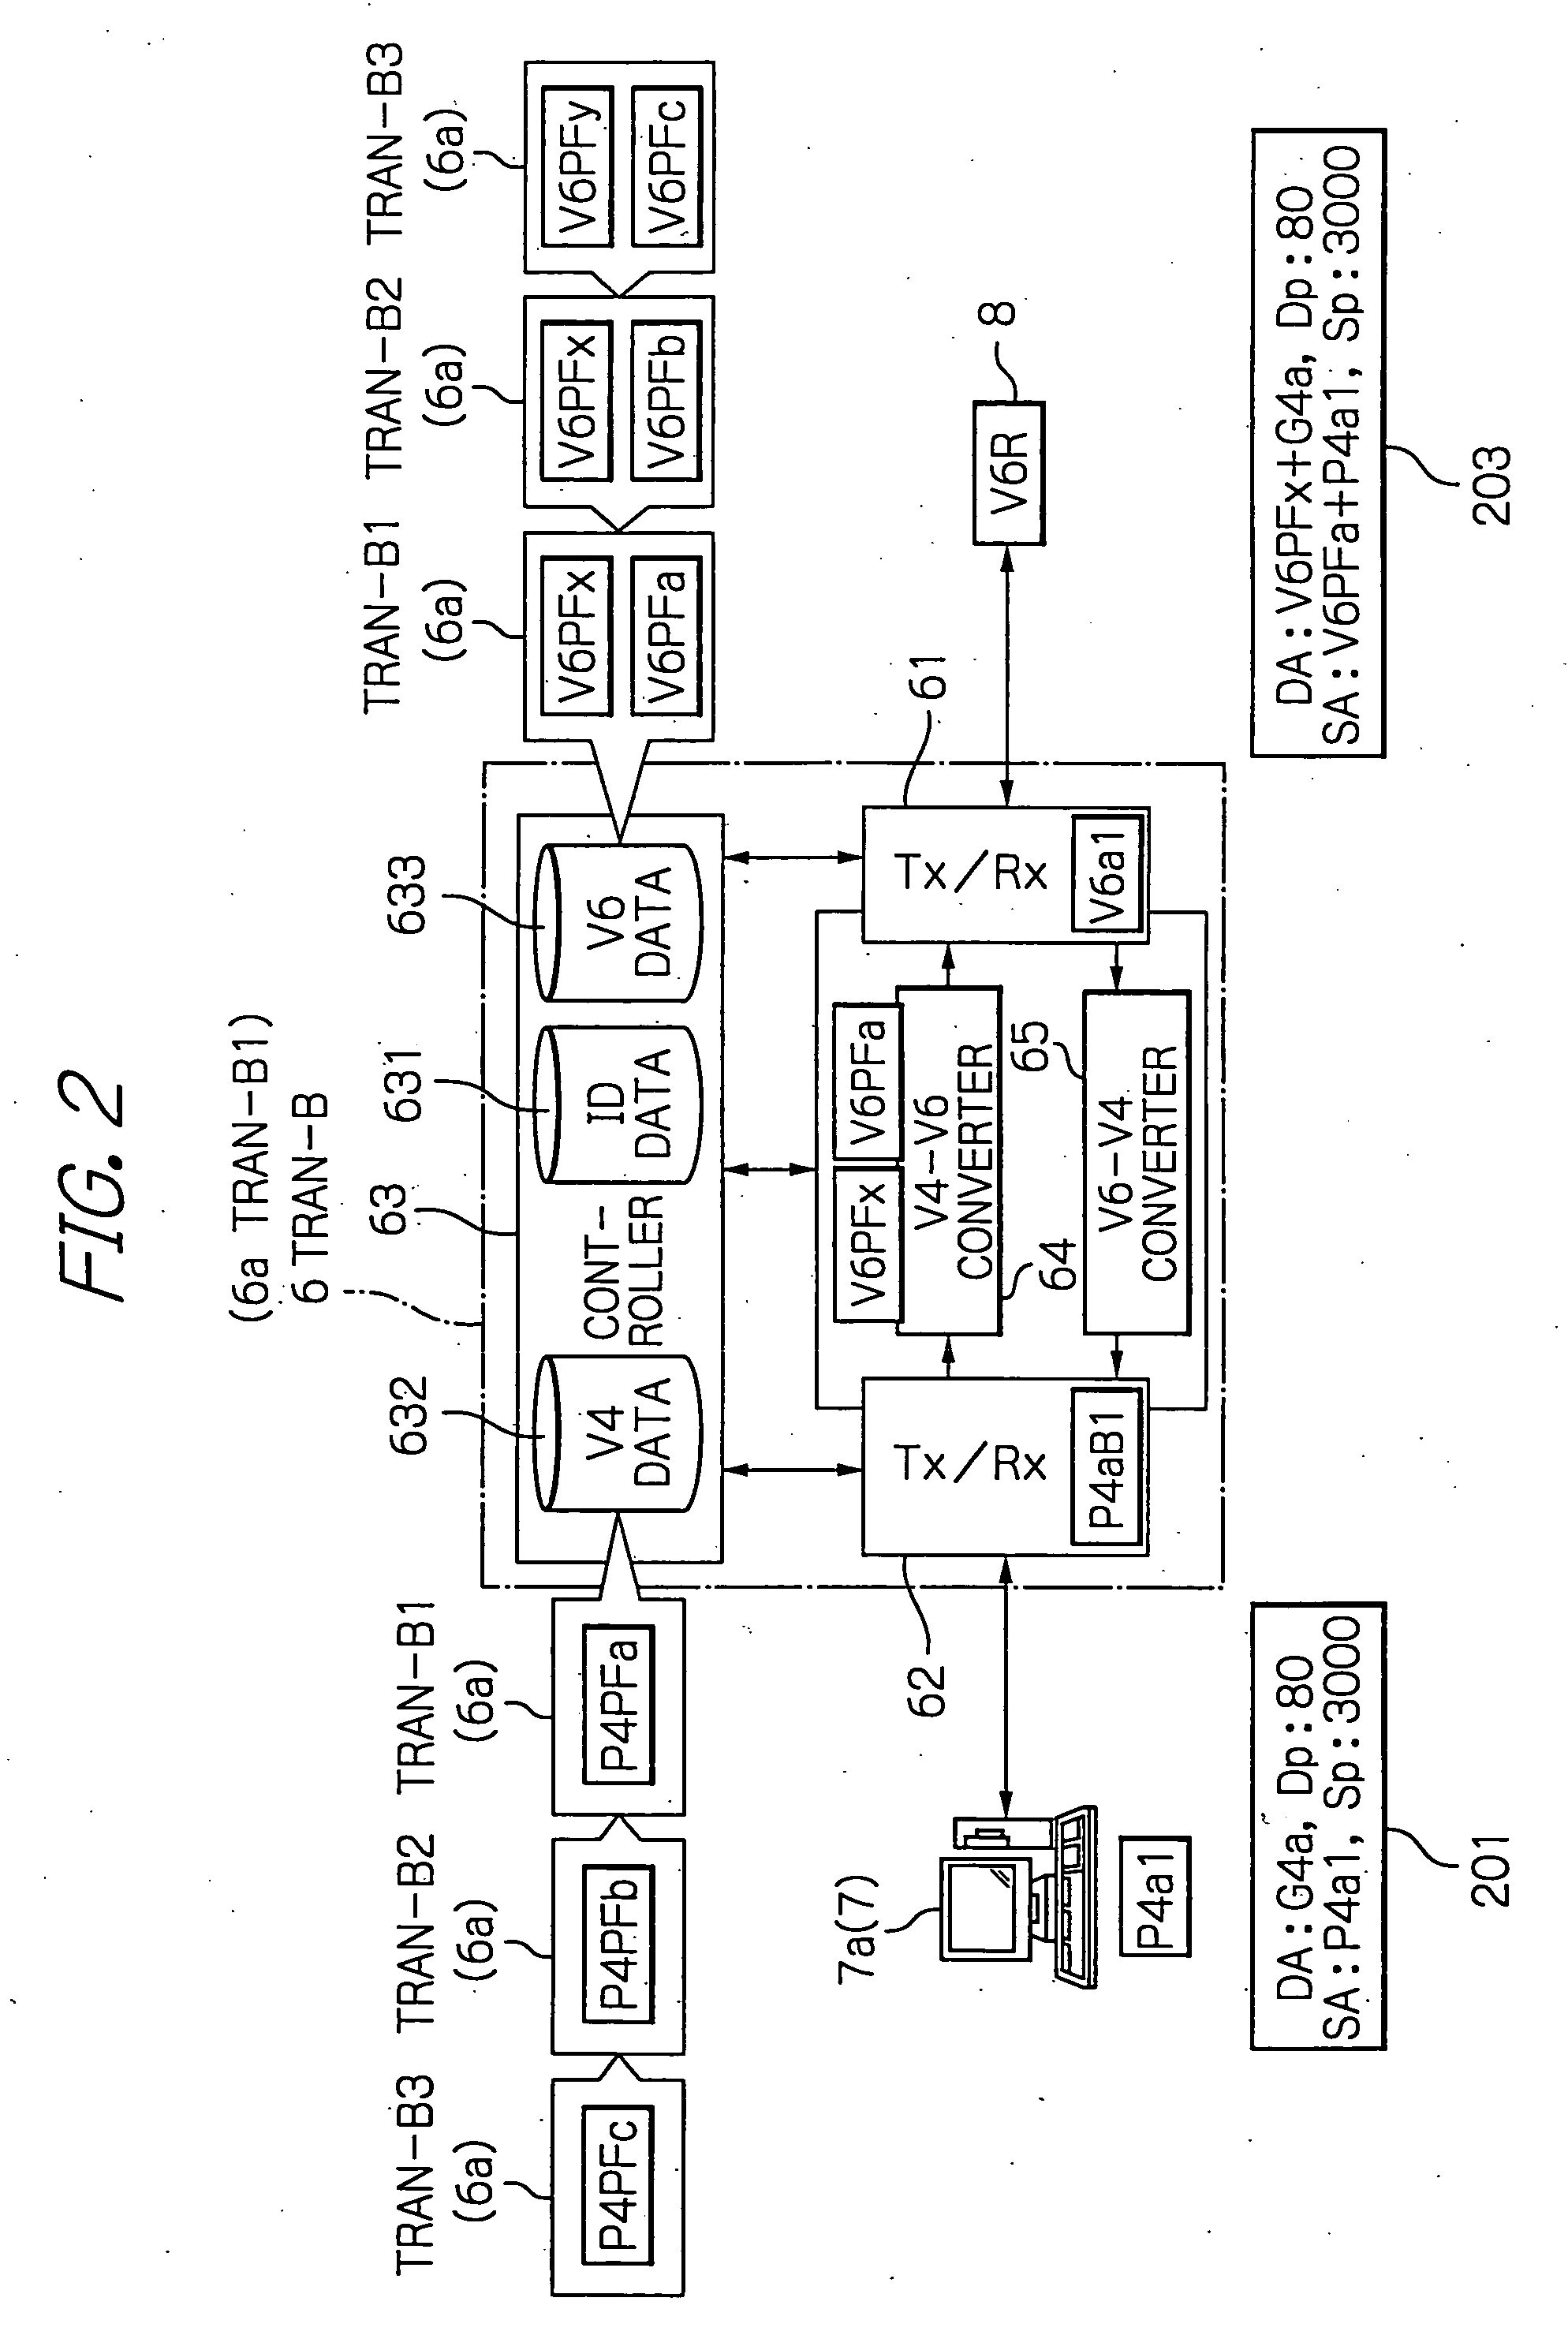 Network system for communicating between different IP versions with multiple translators